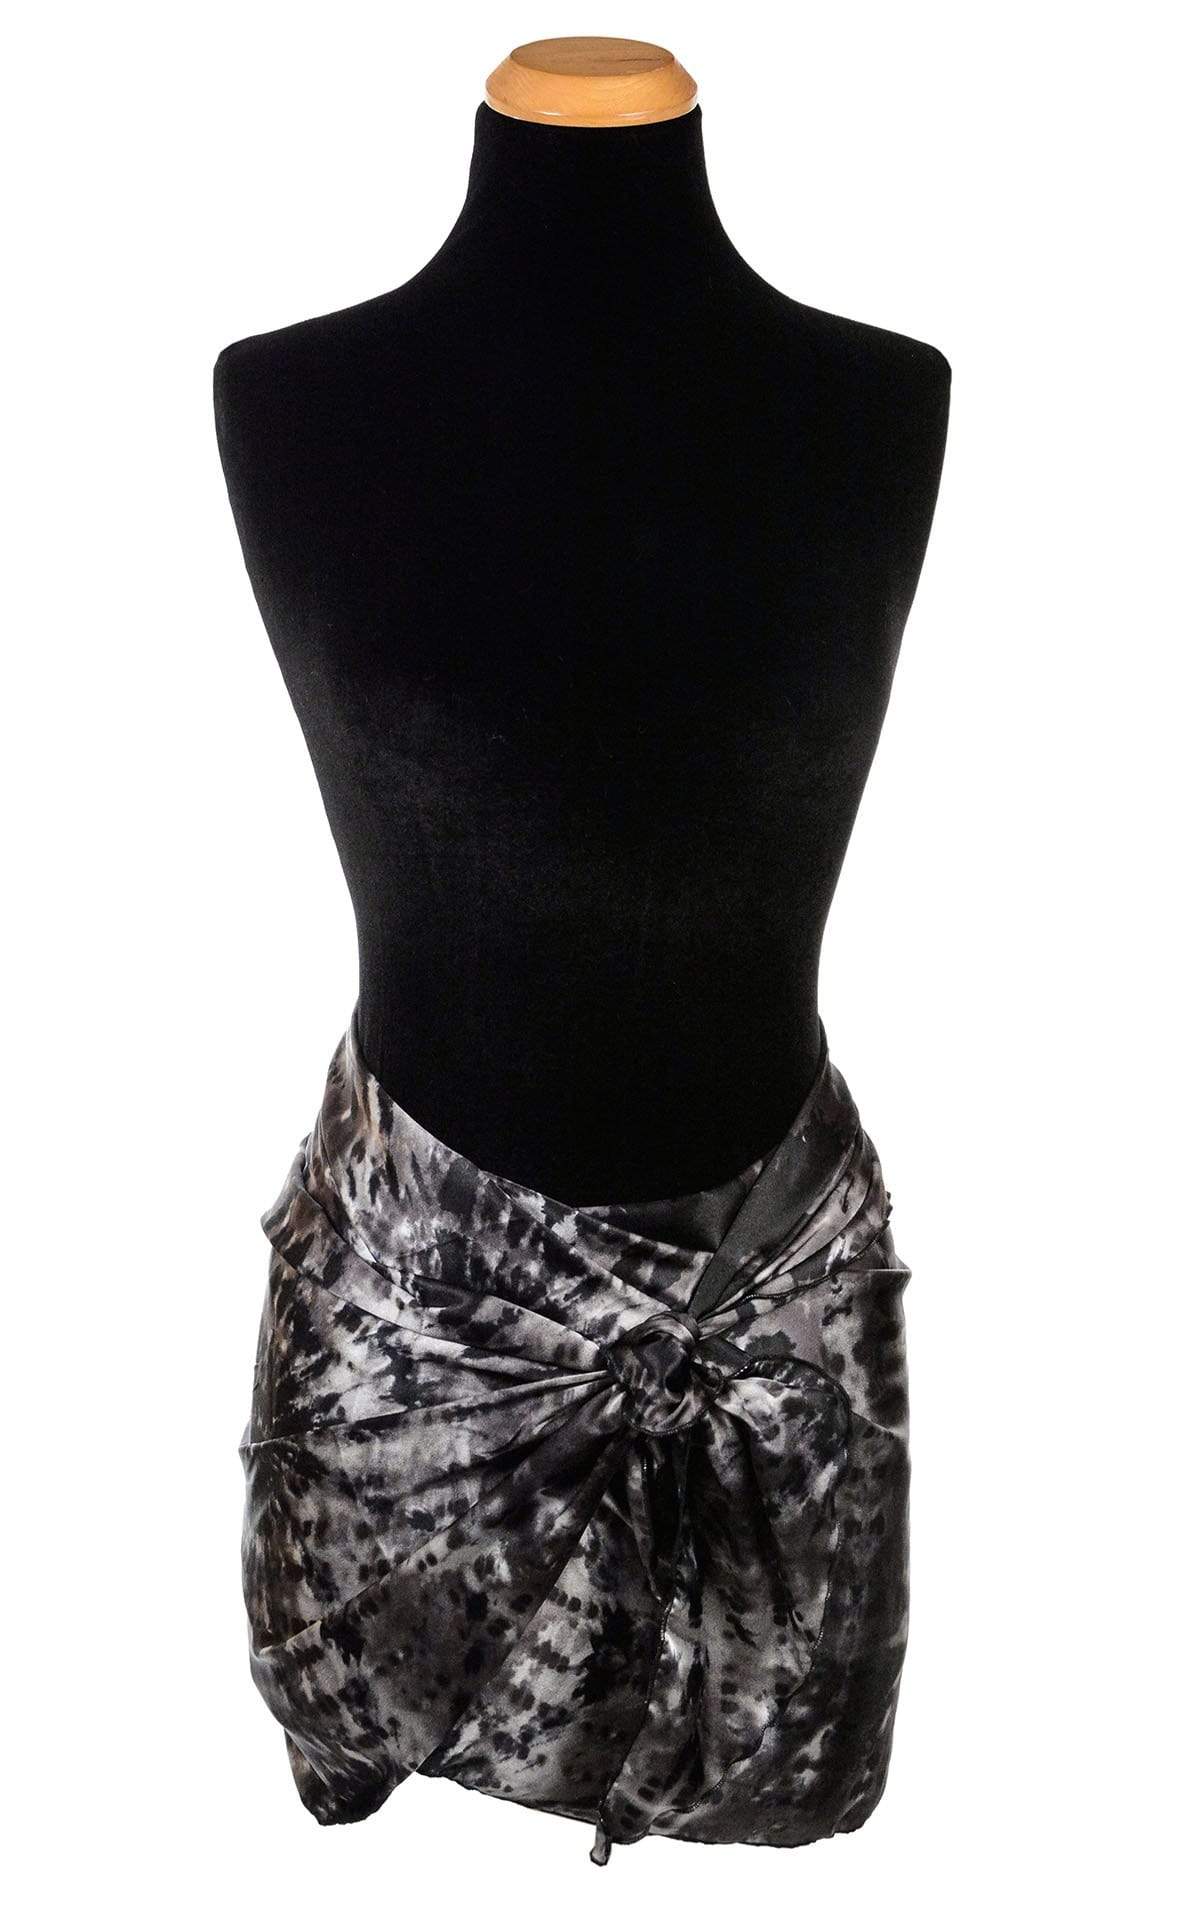 Women’s  Large Handkerchief Scarf, Wrap on Mannequin wrapped as skirt | Egyptian Scarab, Black, Gray, and off-white tie-dye | Handmade in Seattle WA | Pandemonium Millinery